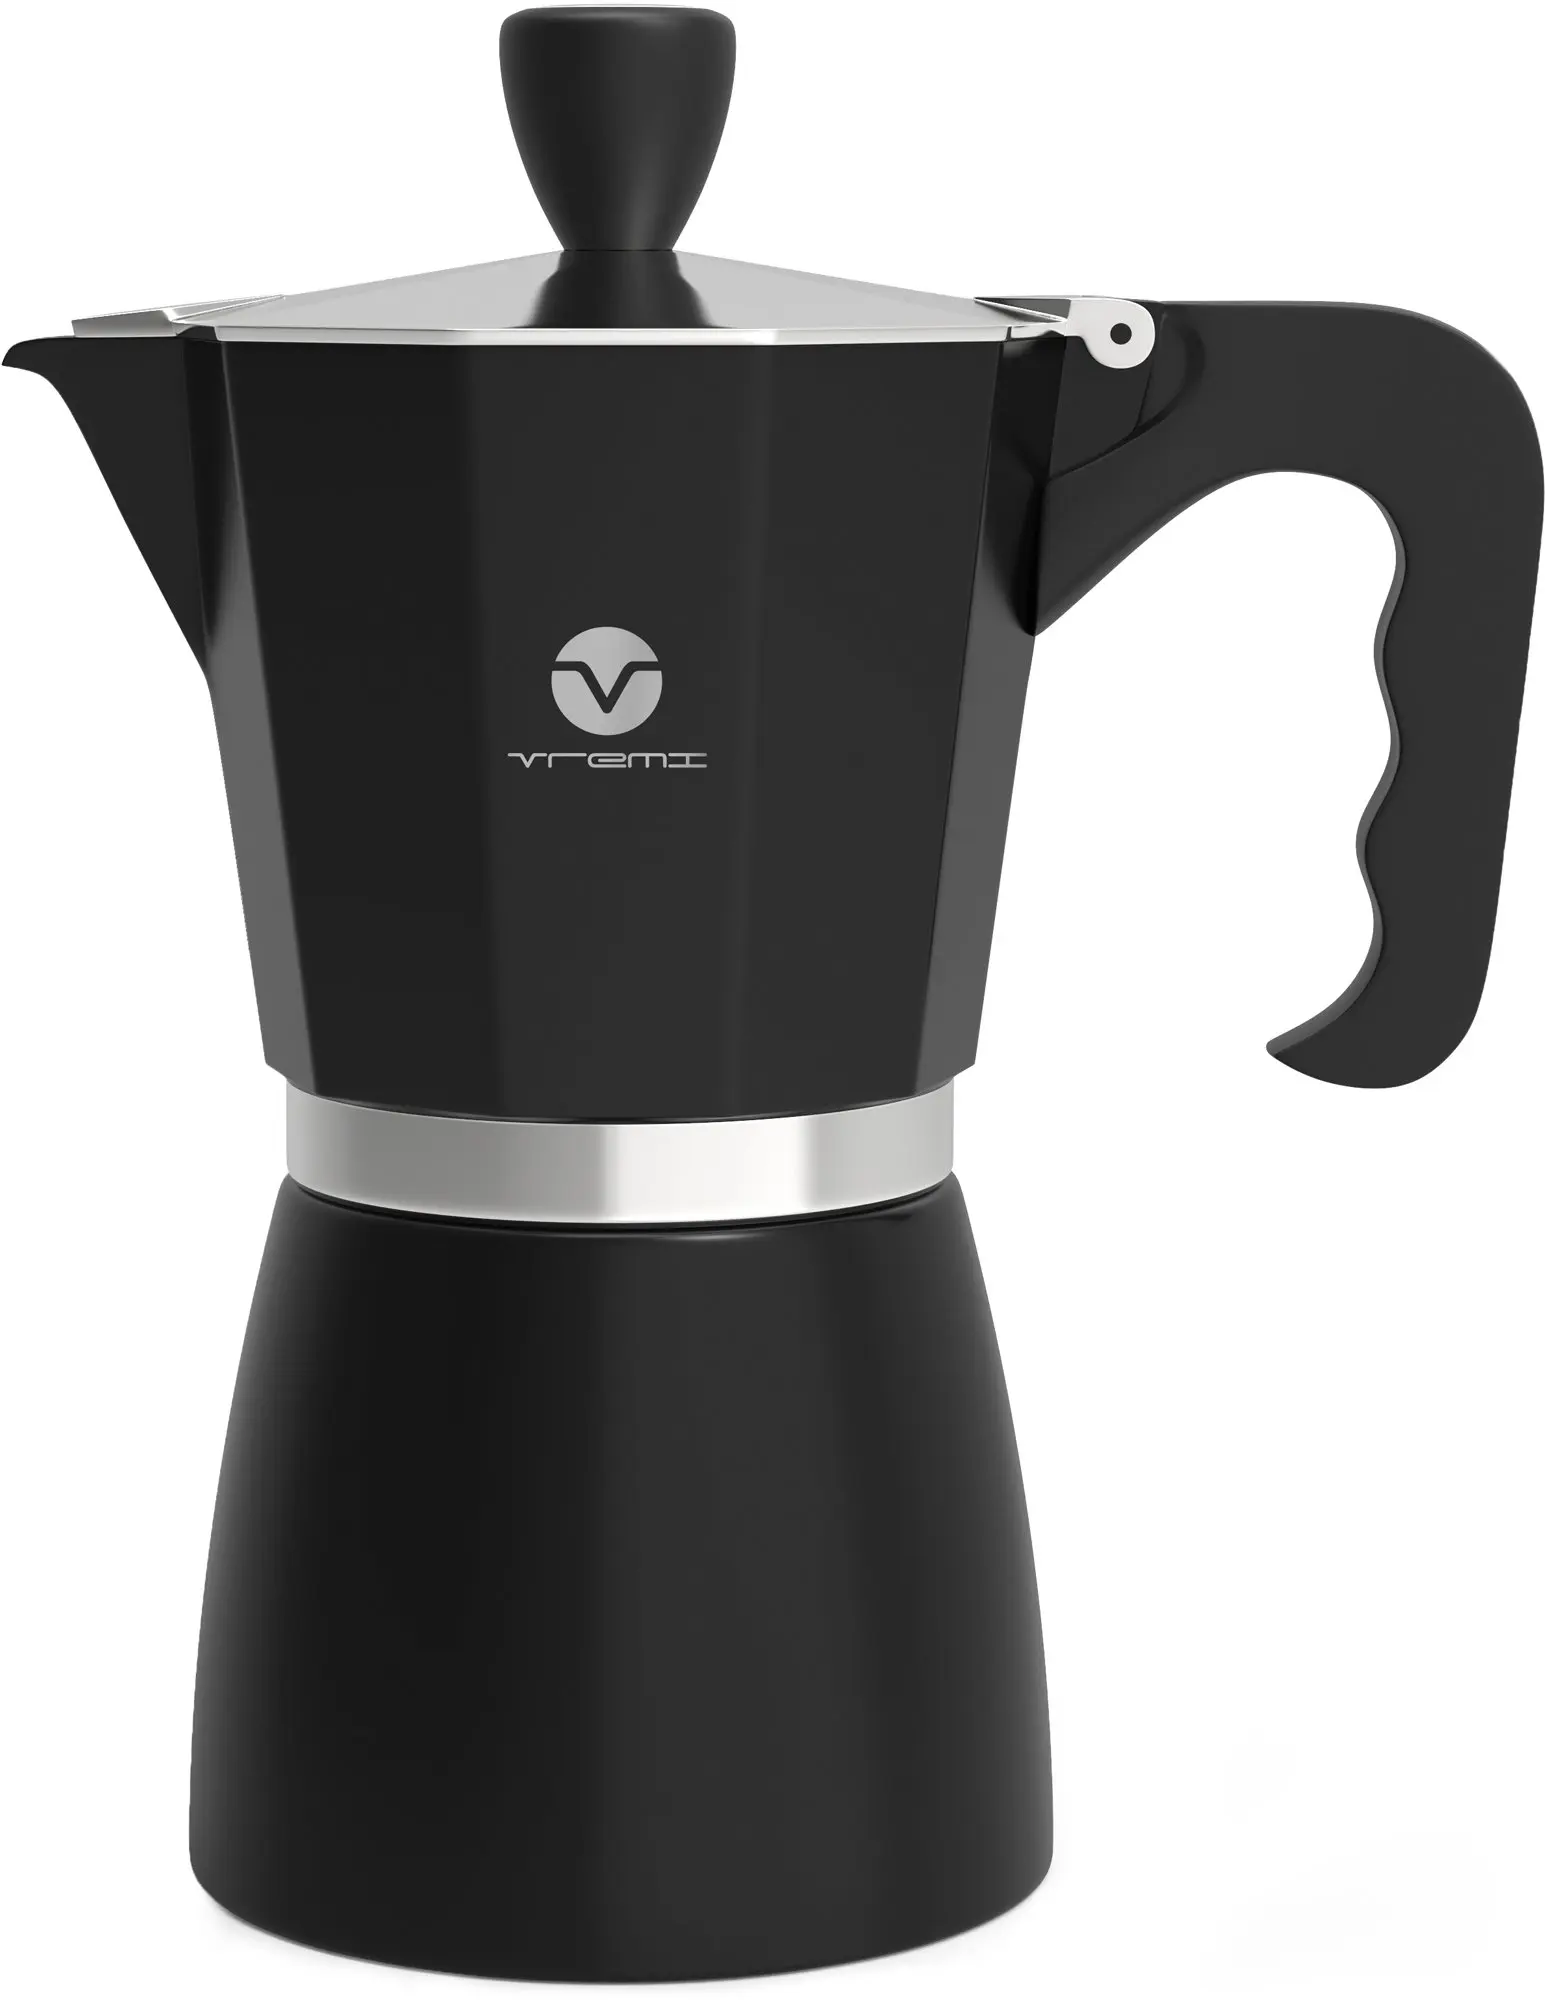 Strong Handle ETHDA Stovetop Espresso Maker Latte Safety Valve Aluminum 3 Cup Coffee Maker for Italian Cappuccino On the Go Camping Pot Extra Gasket Included Silver Moka Pot